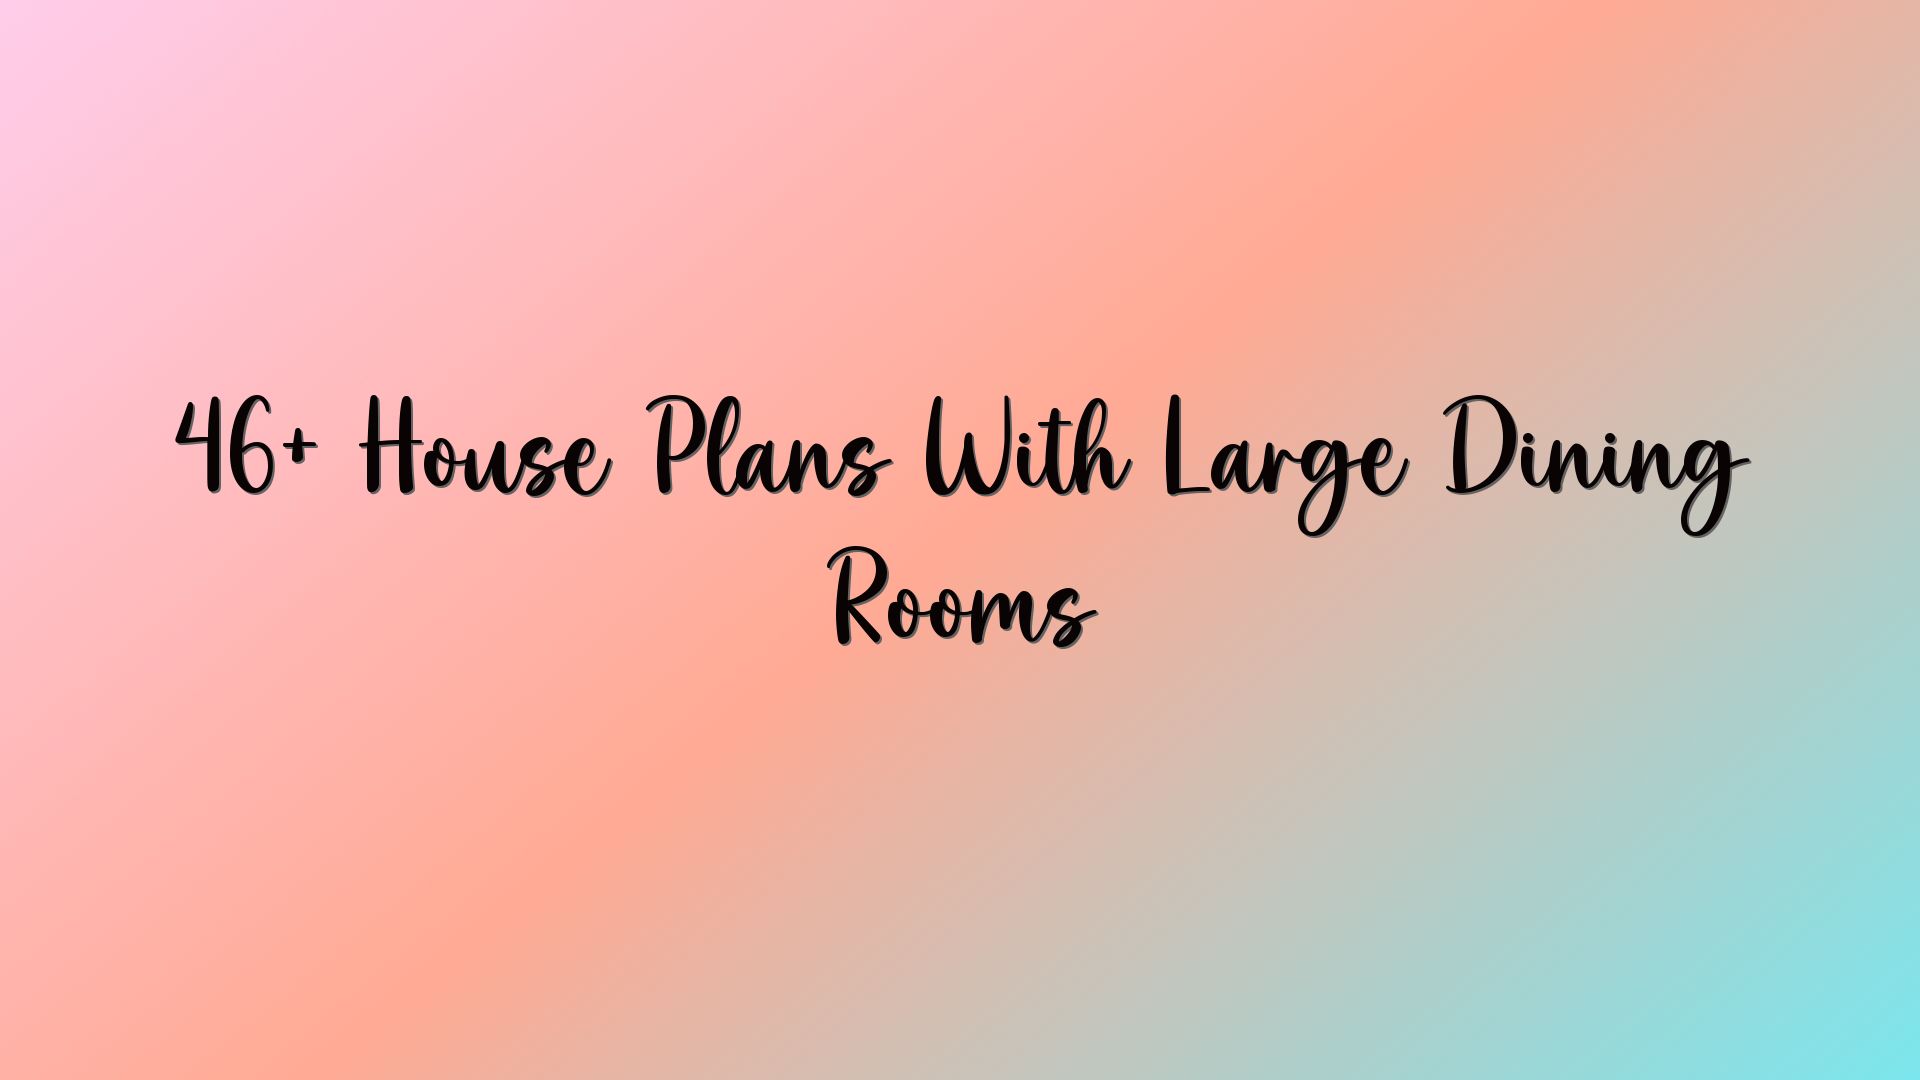 46+ House Plans With Large Dining Rooms